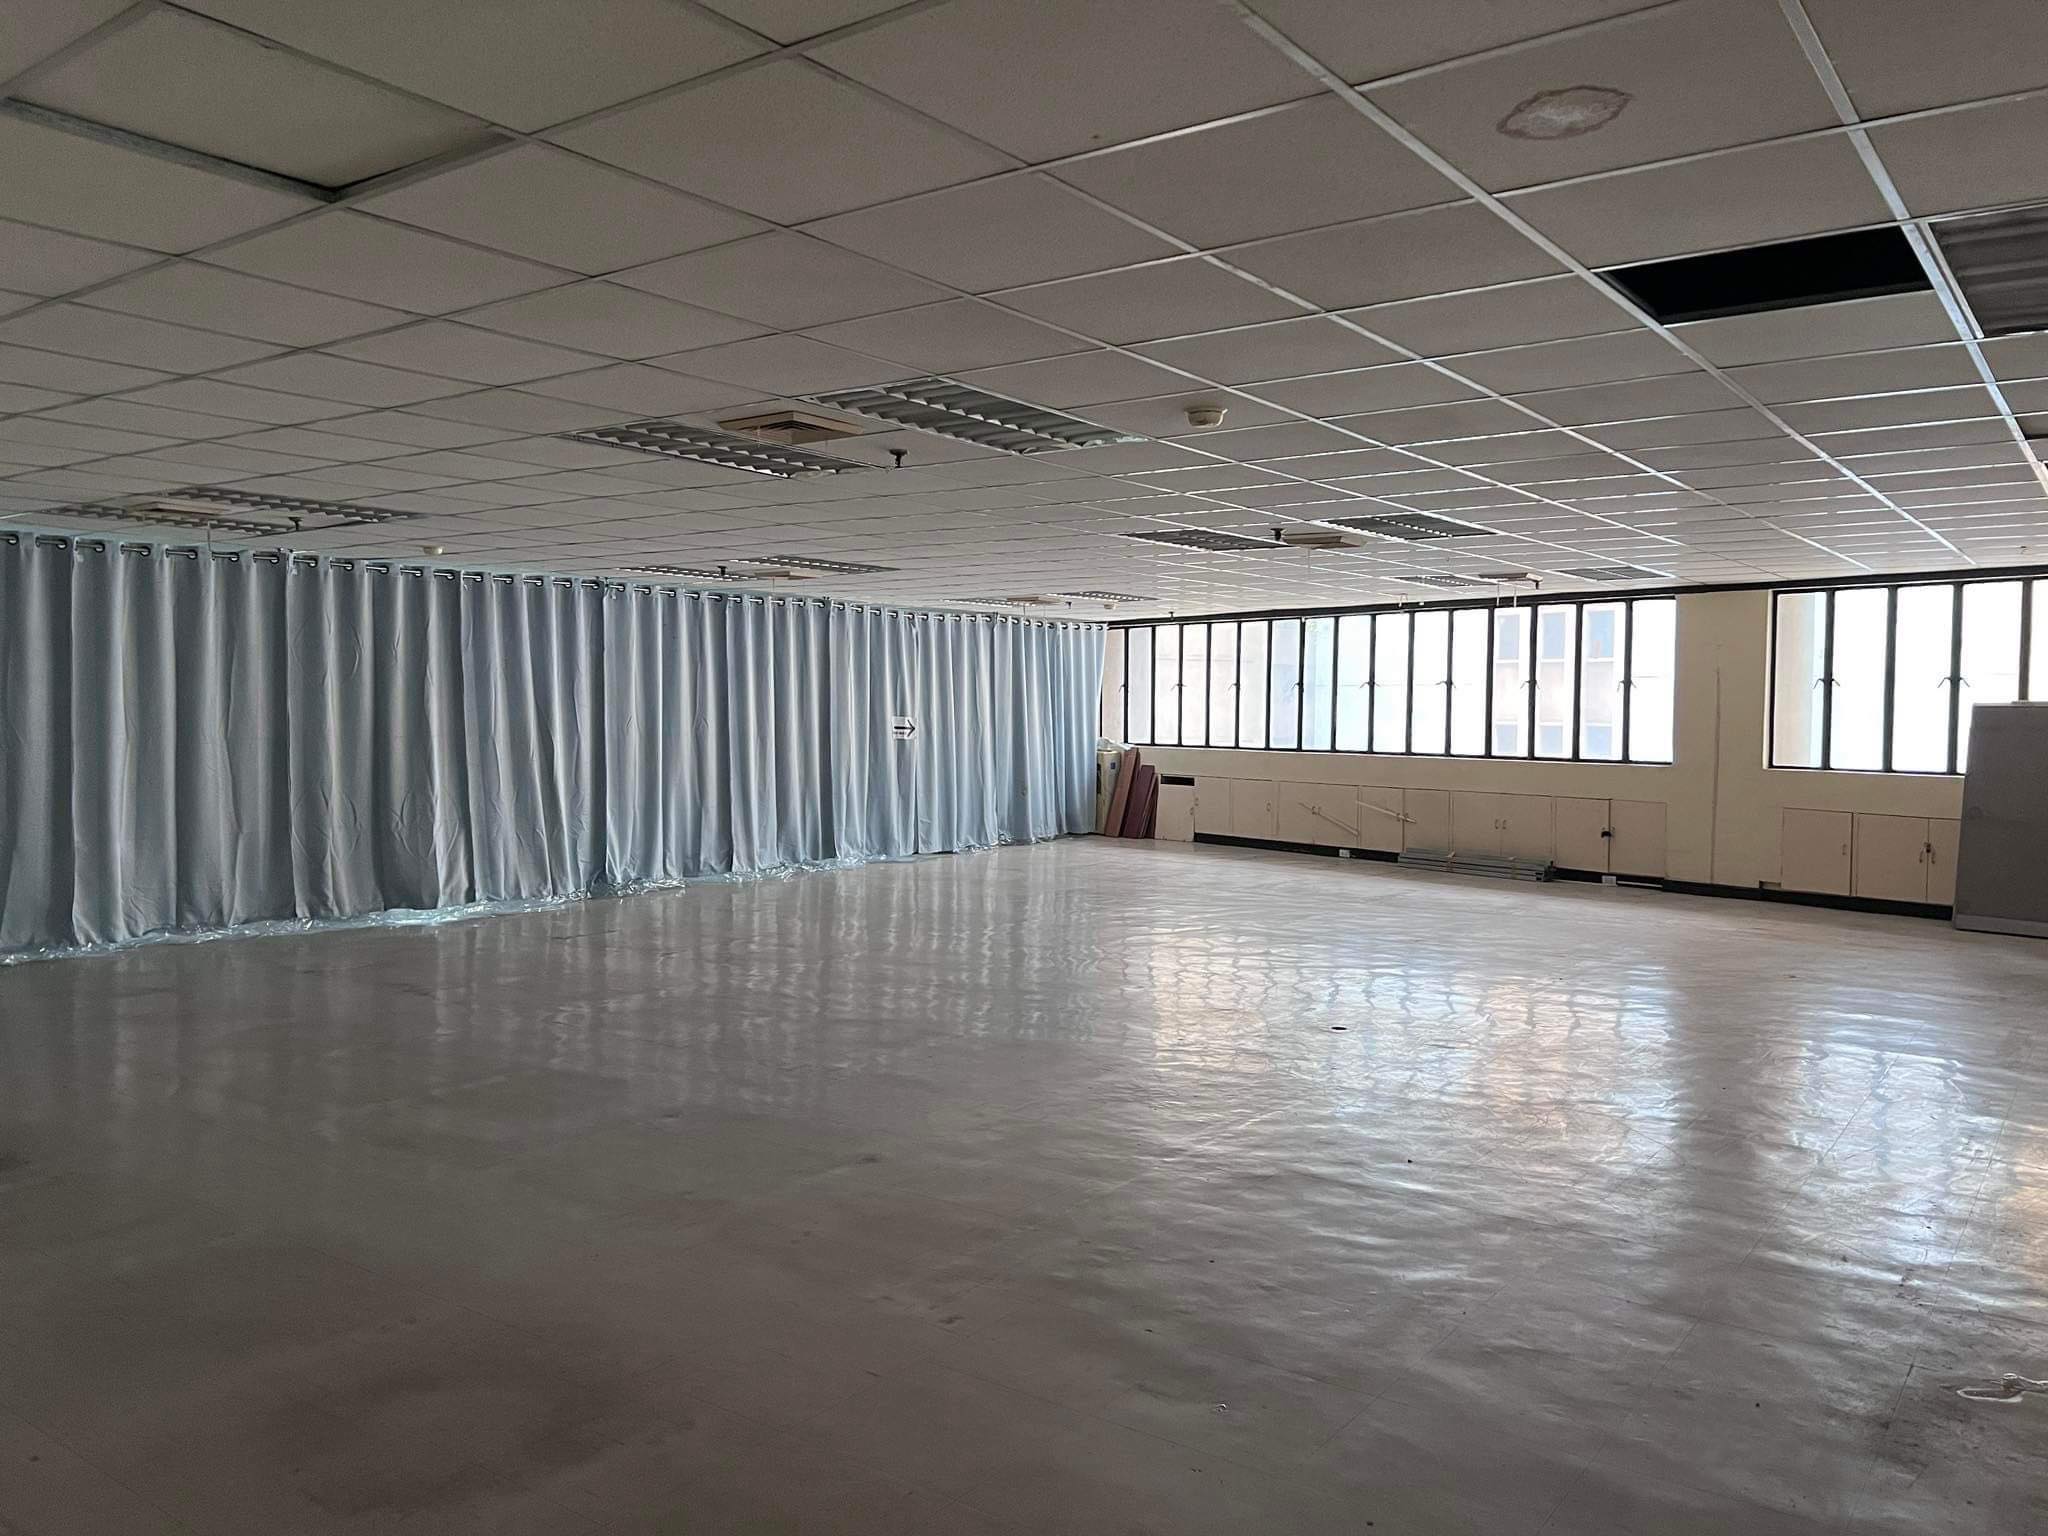 For Rent Lease Warm Shell Office Space Makati City Manila